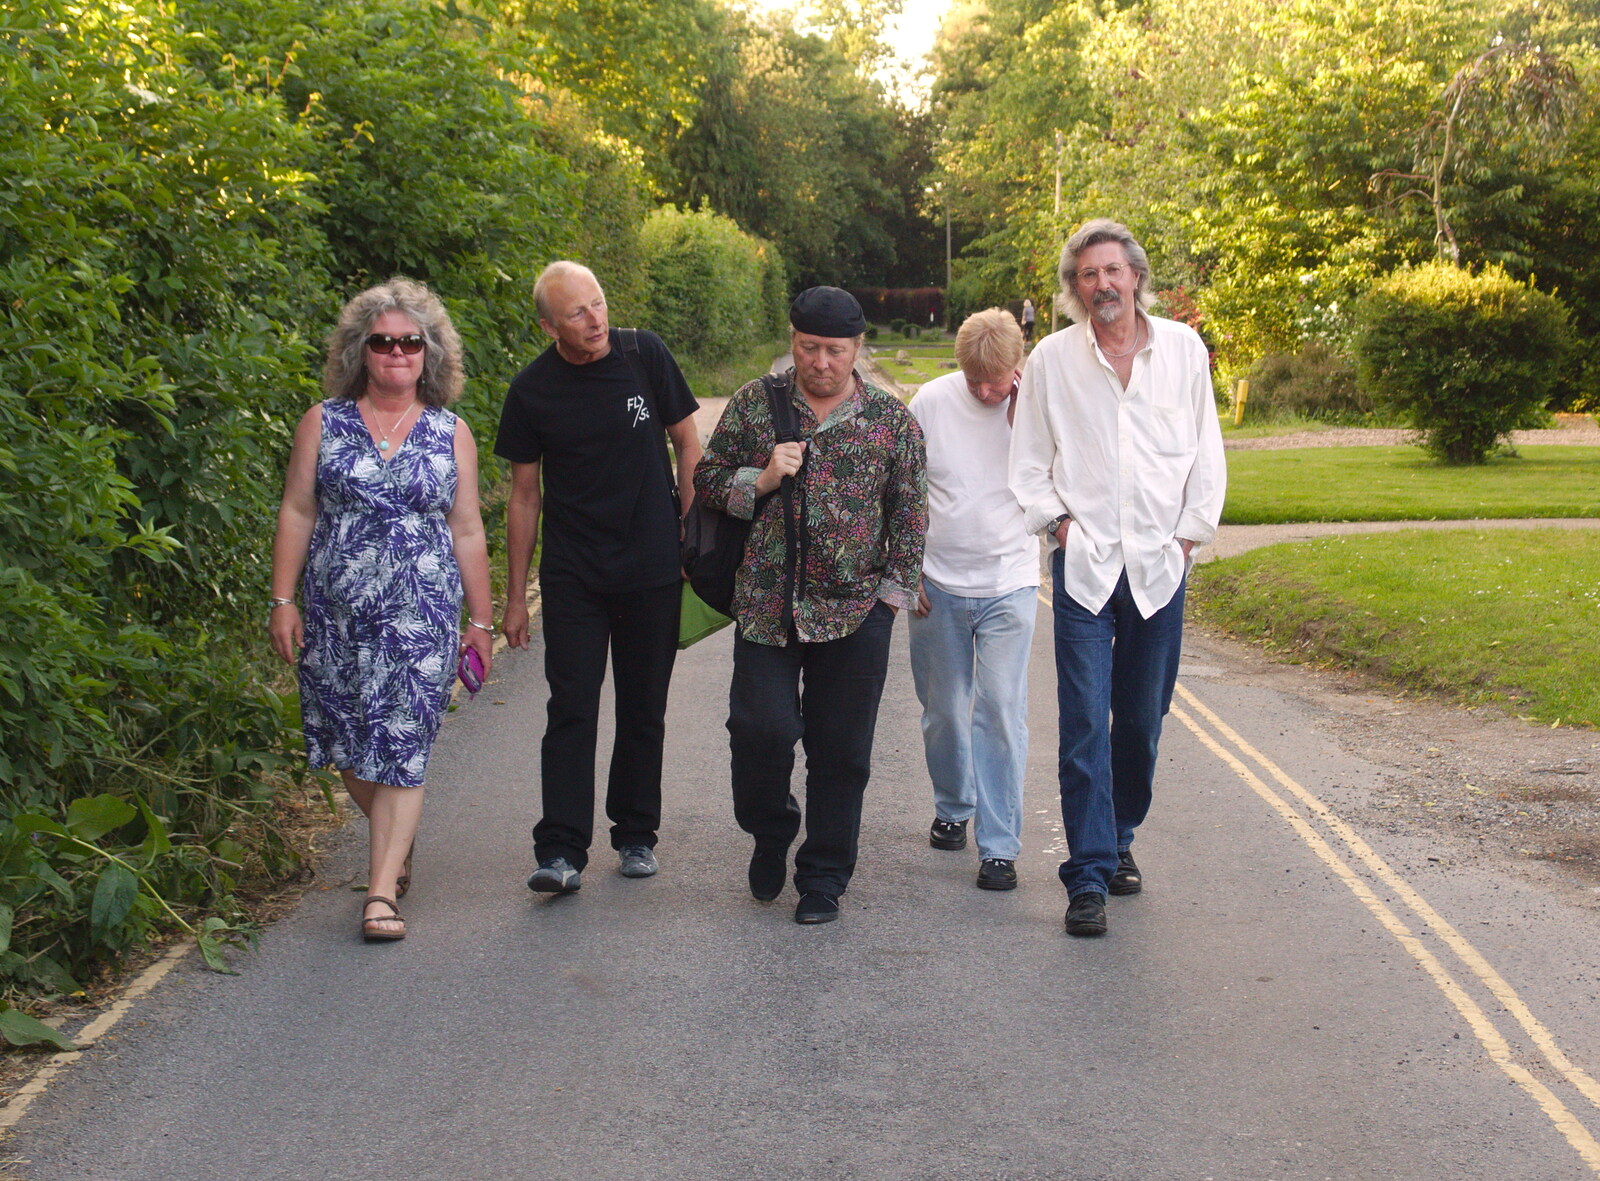 The band walk up Bellrope Lane from The BBs at Diss Rugby Club, Bellrope Lane, Roydon, Norfolk - 7th June 2014